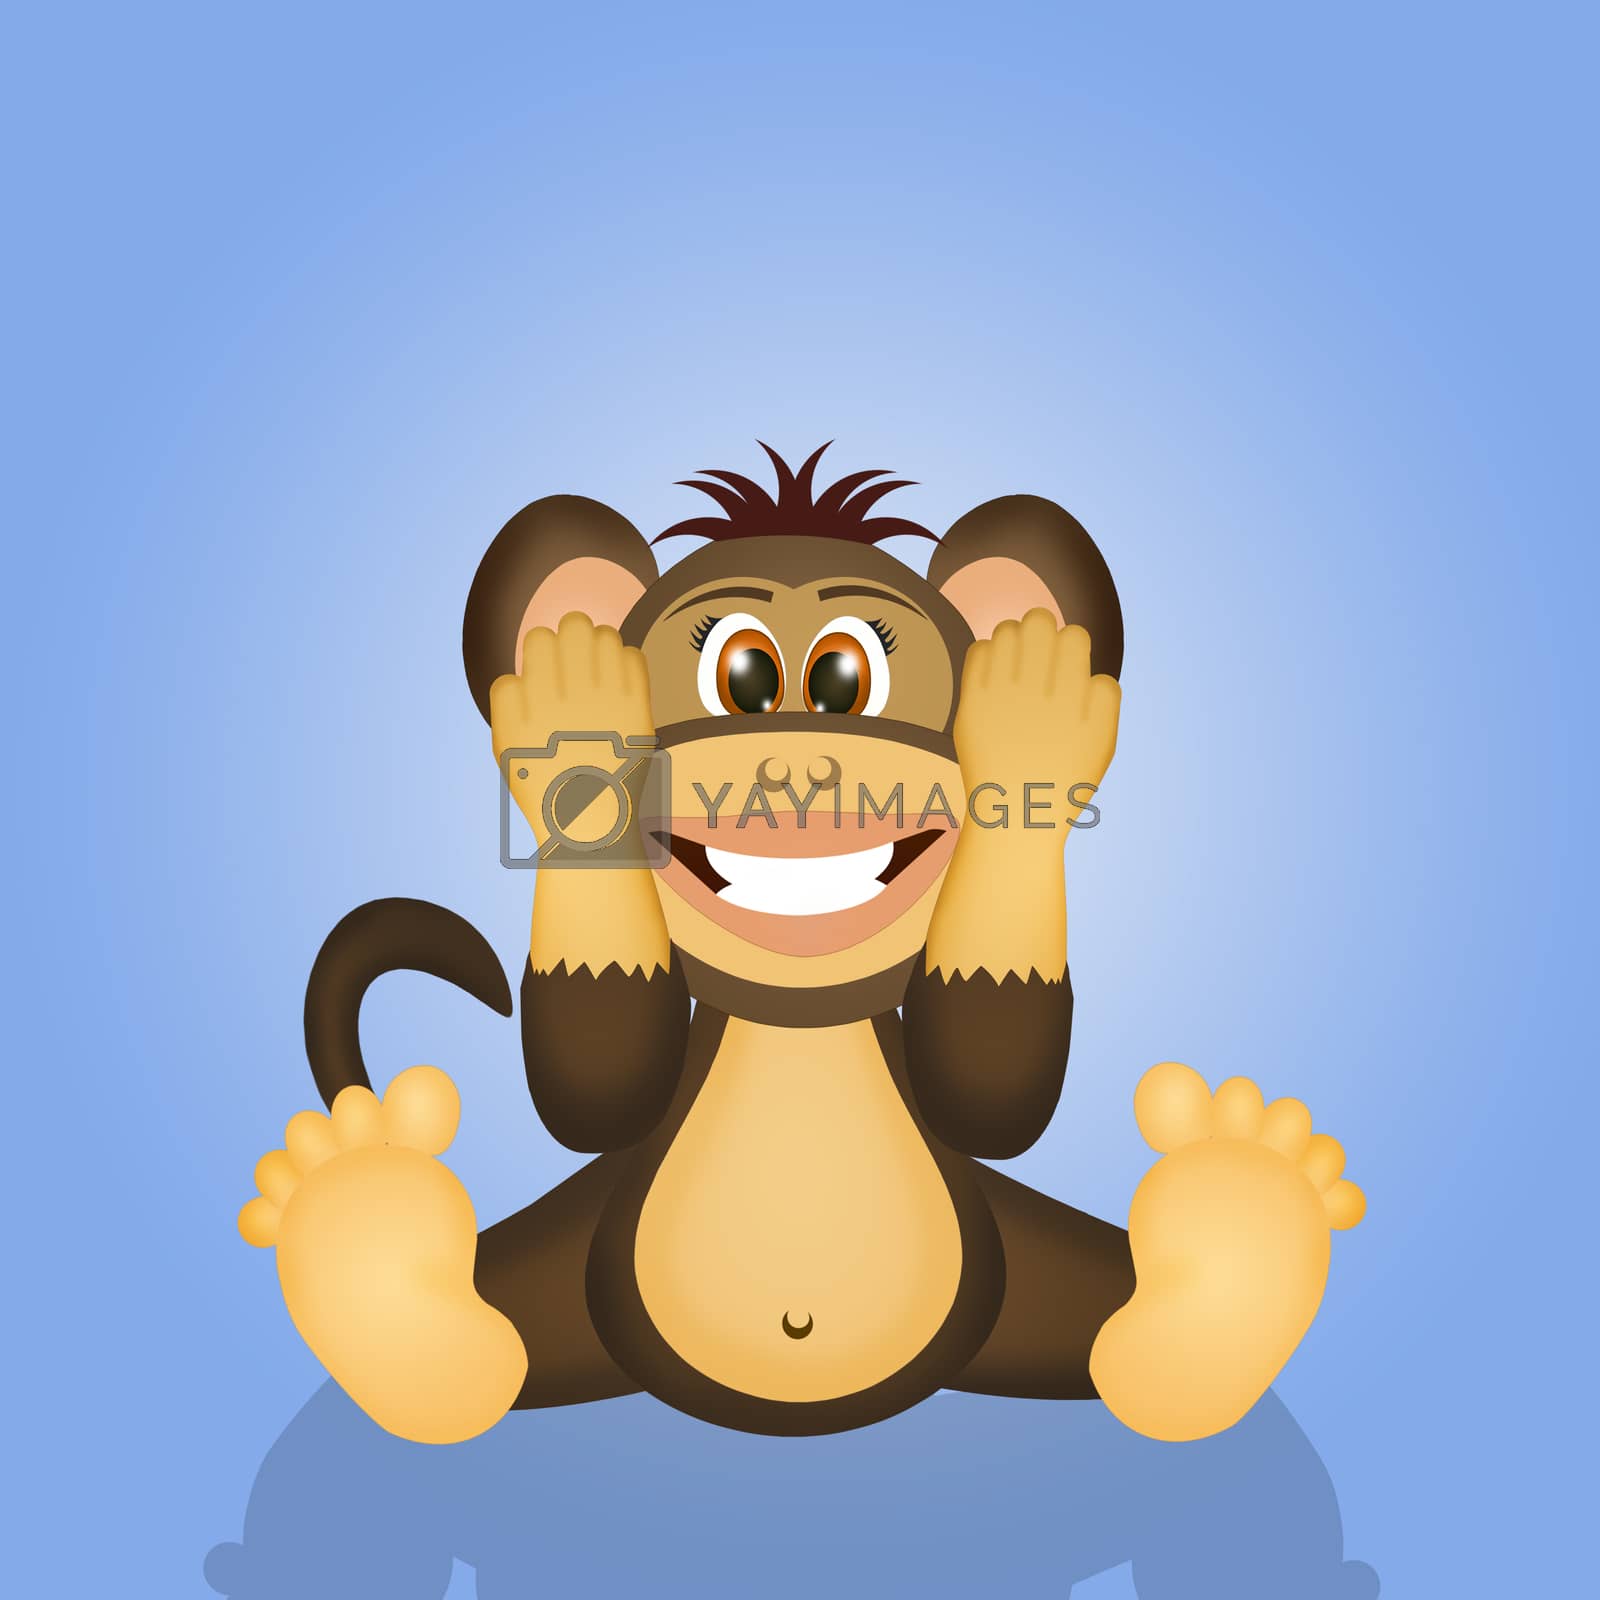 Royalty free image of wise monkey do not hear by adrenalina